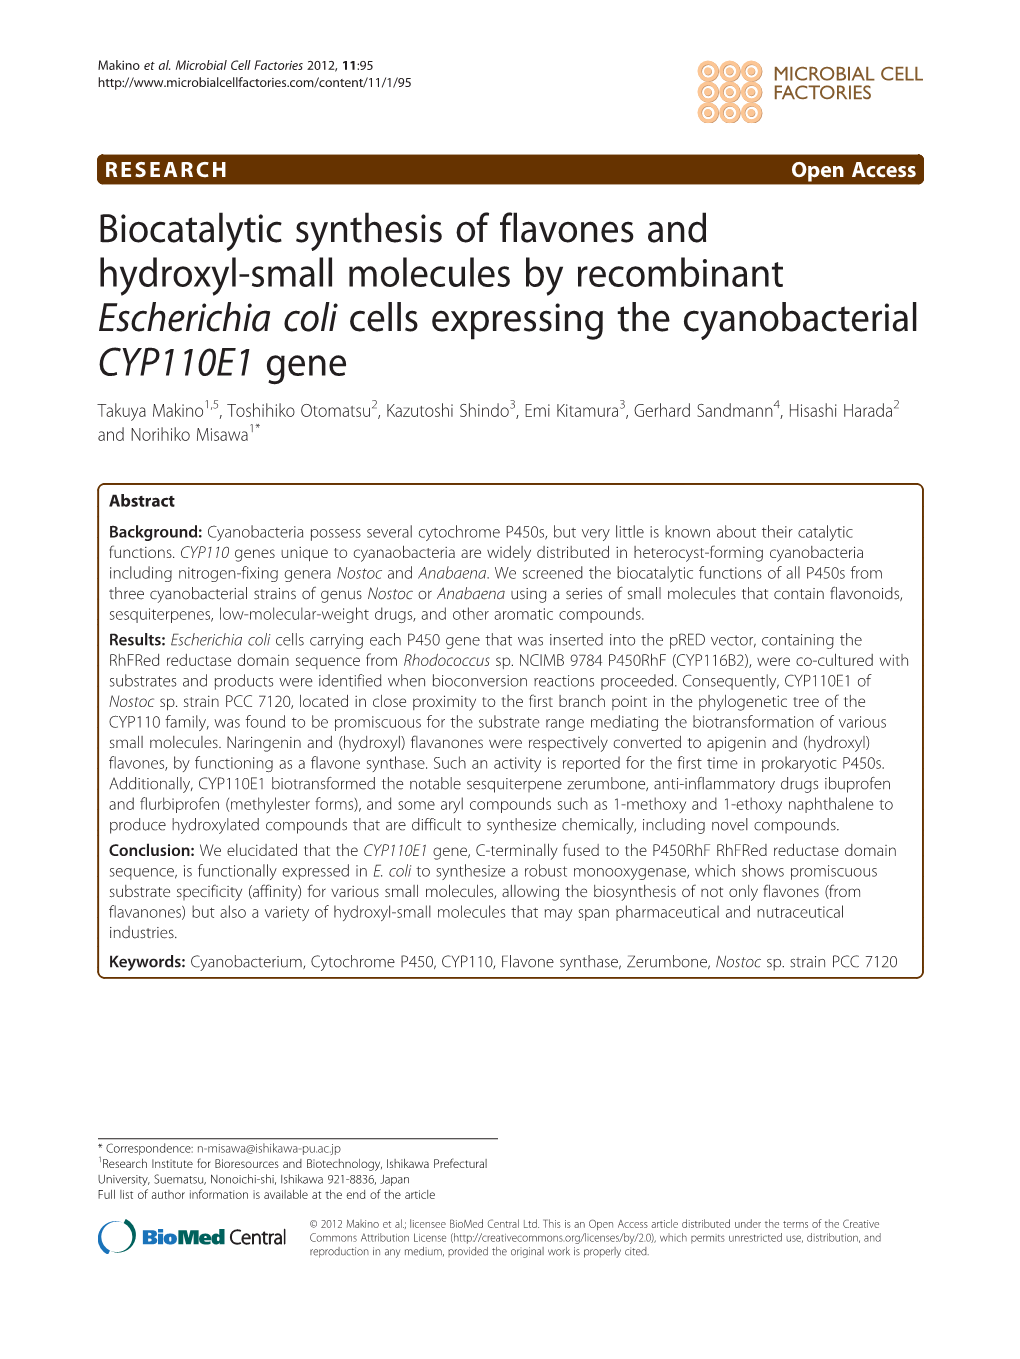 Biocatalytic Synthesis of Flavones and Hydroxyl-Small Molecules By